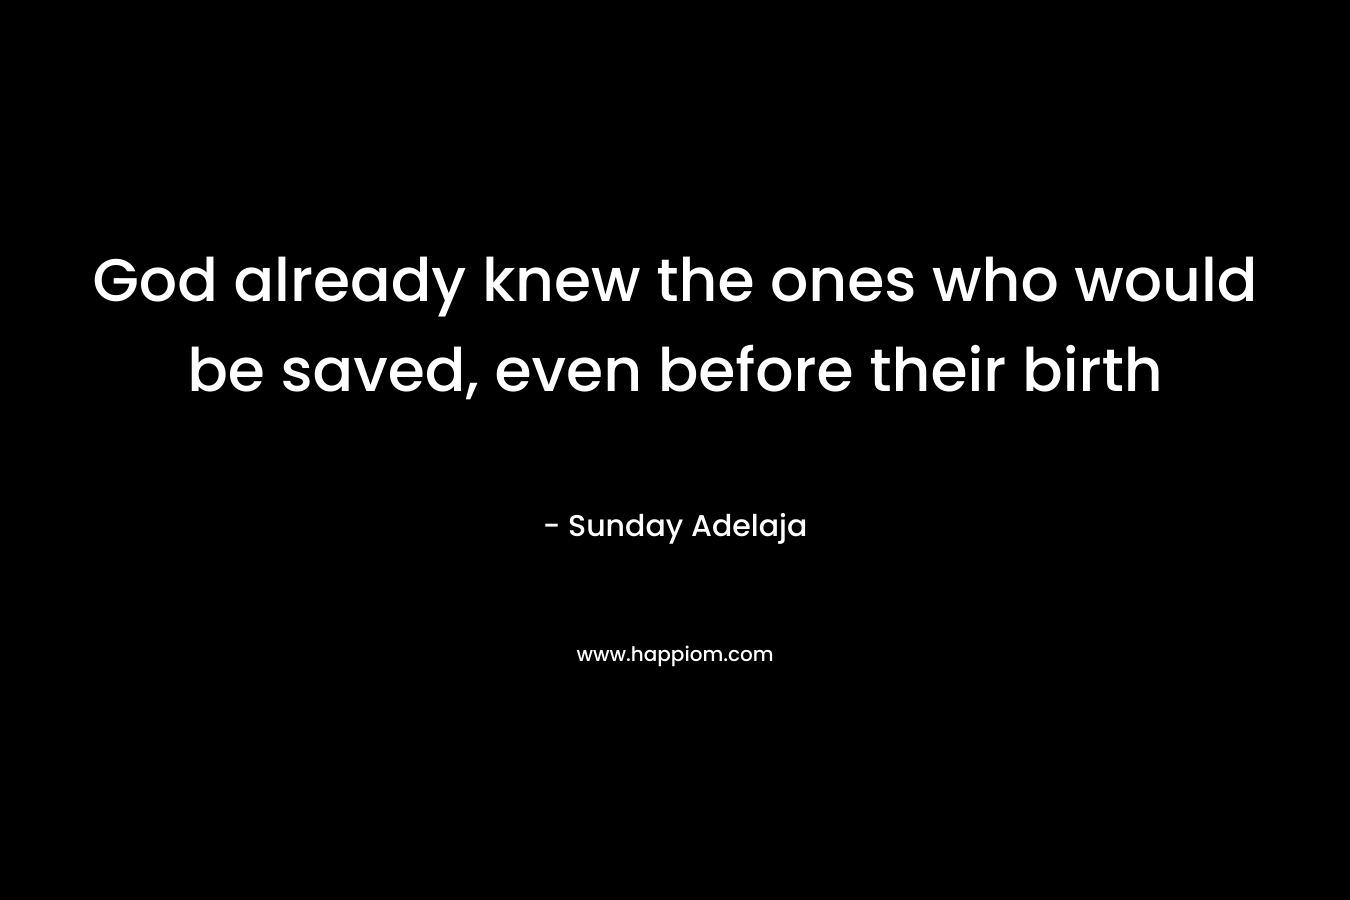 God already knew the ones who would be saved, even before their birth